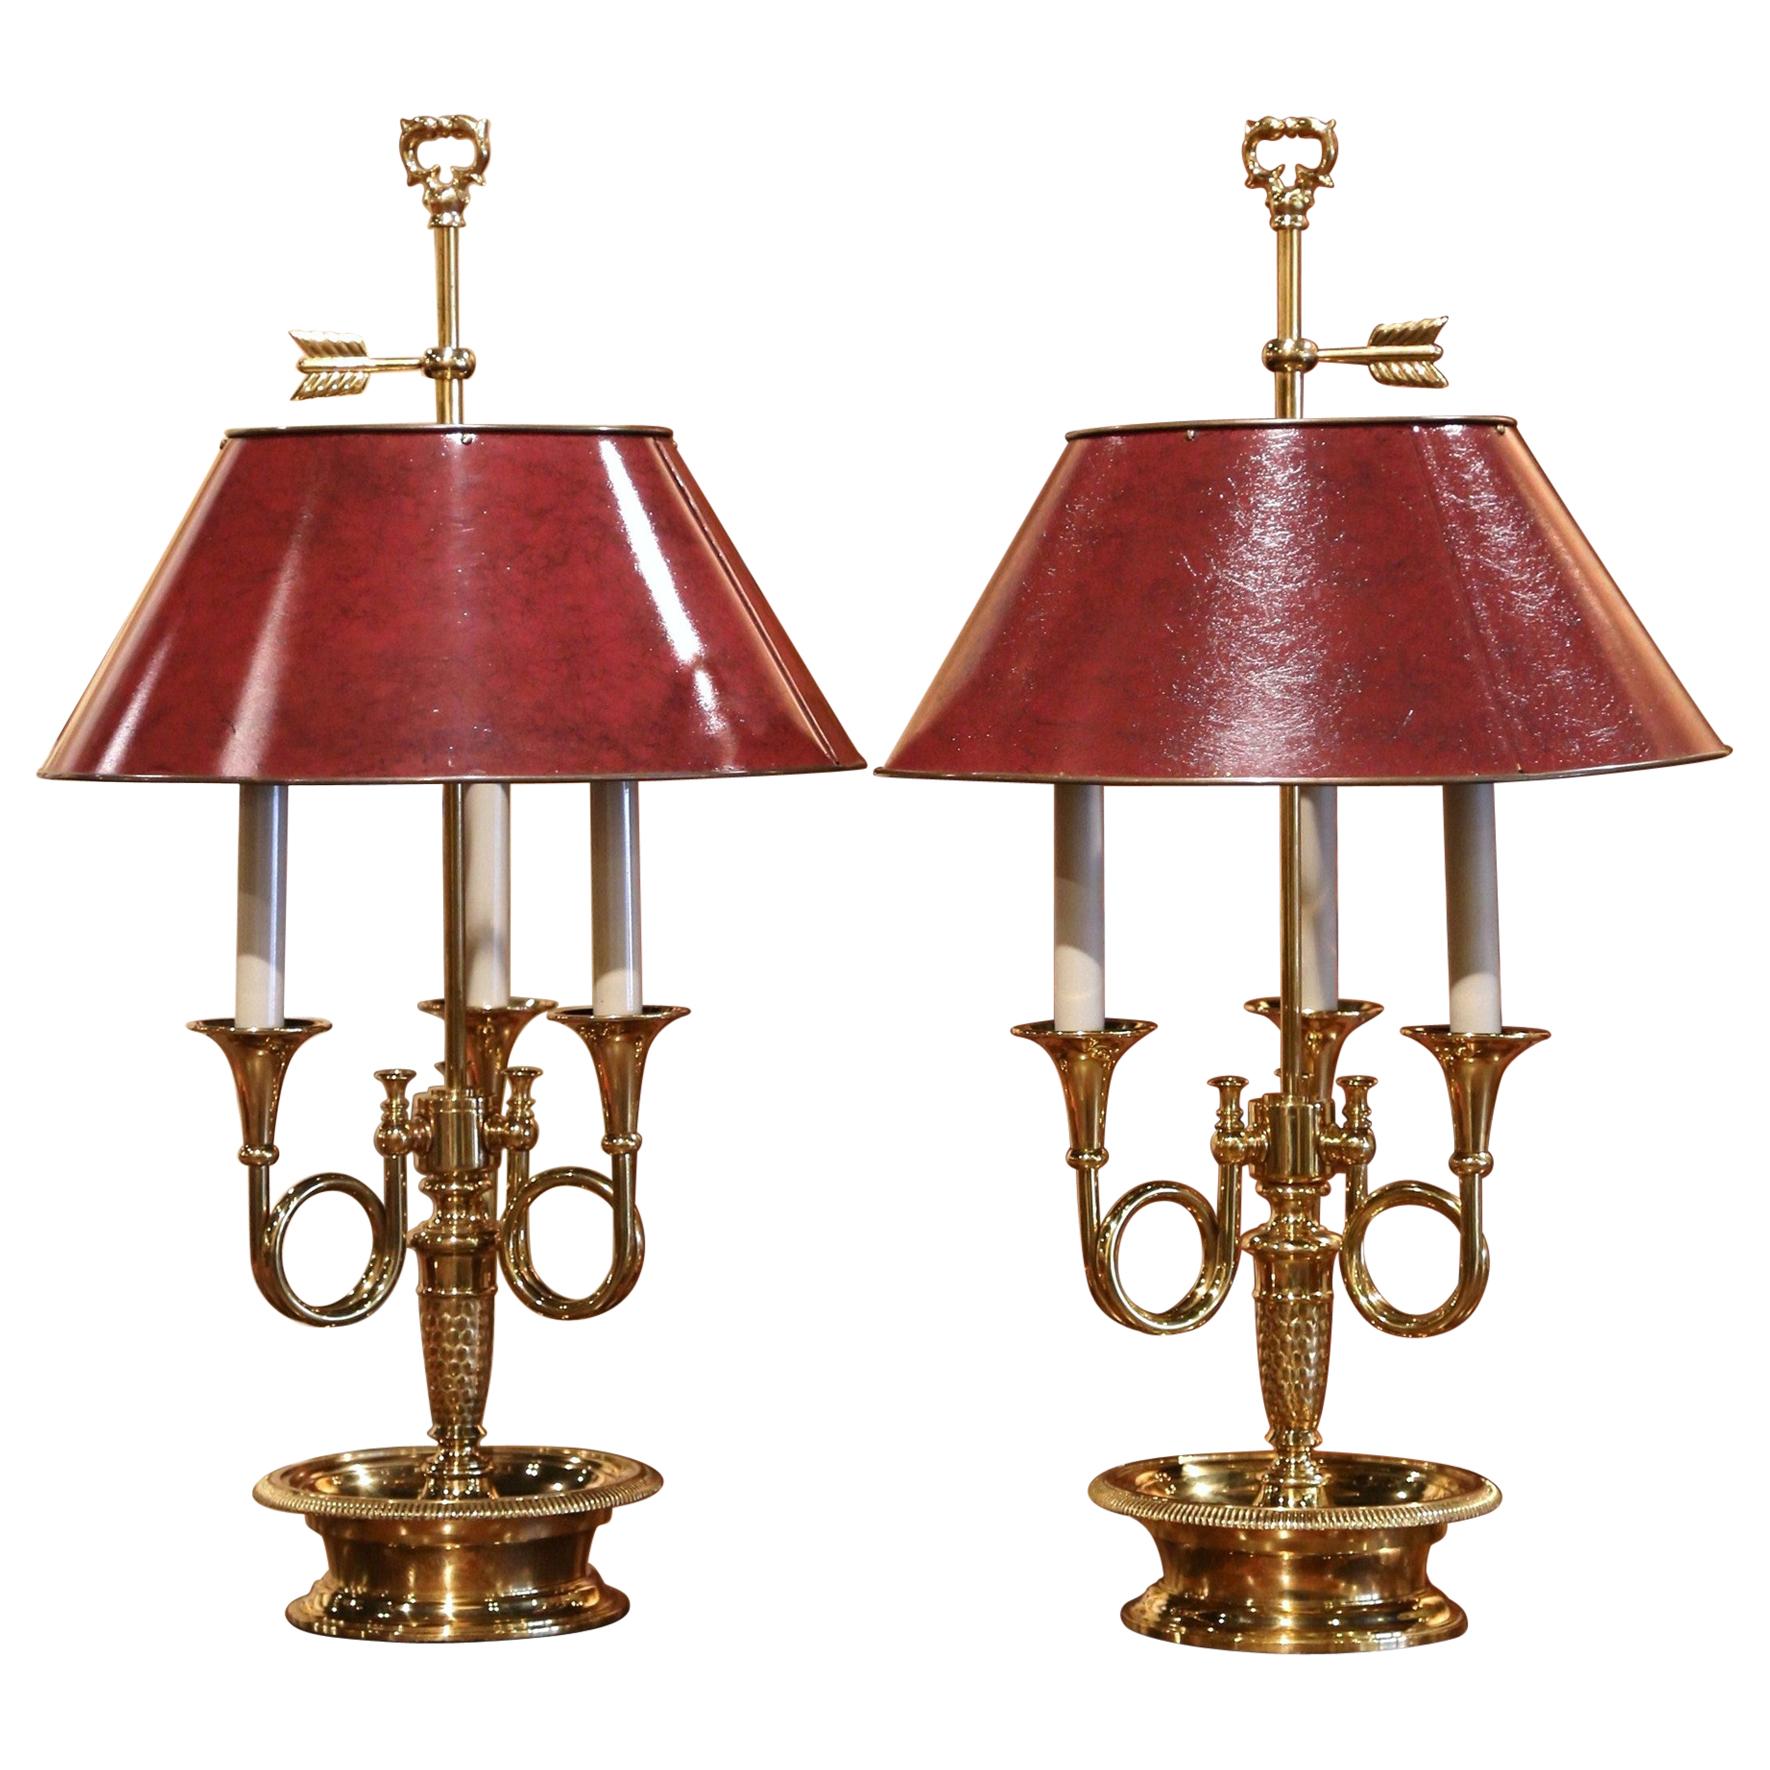 Pair of French Polished Brass Three-Light Table Lamps with Red Tole Shades